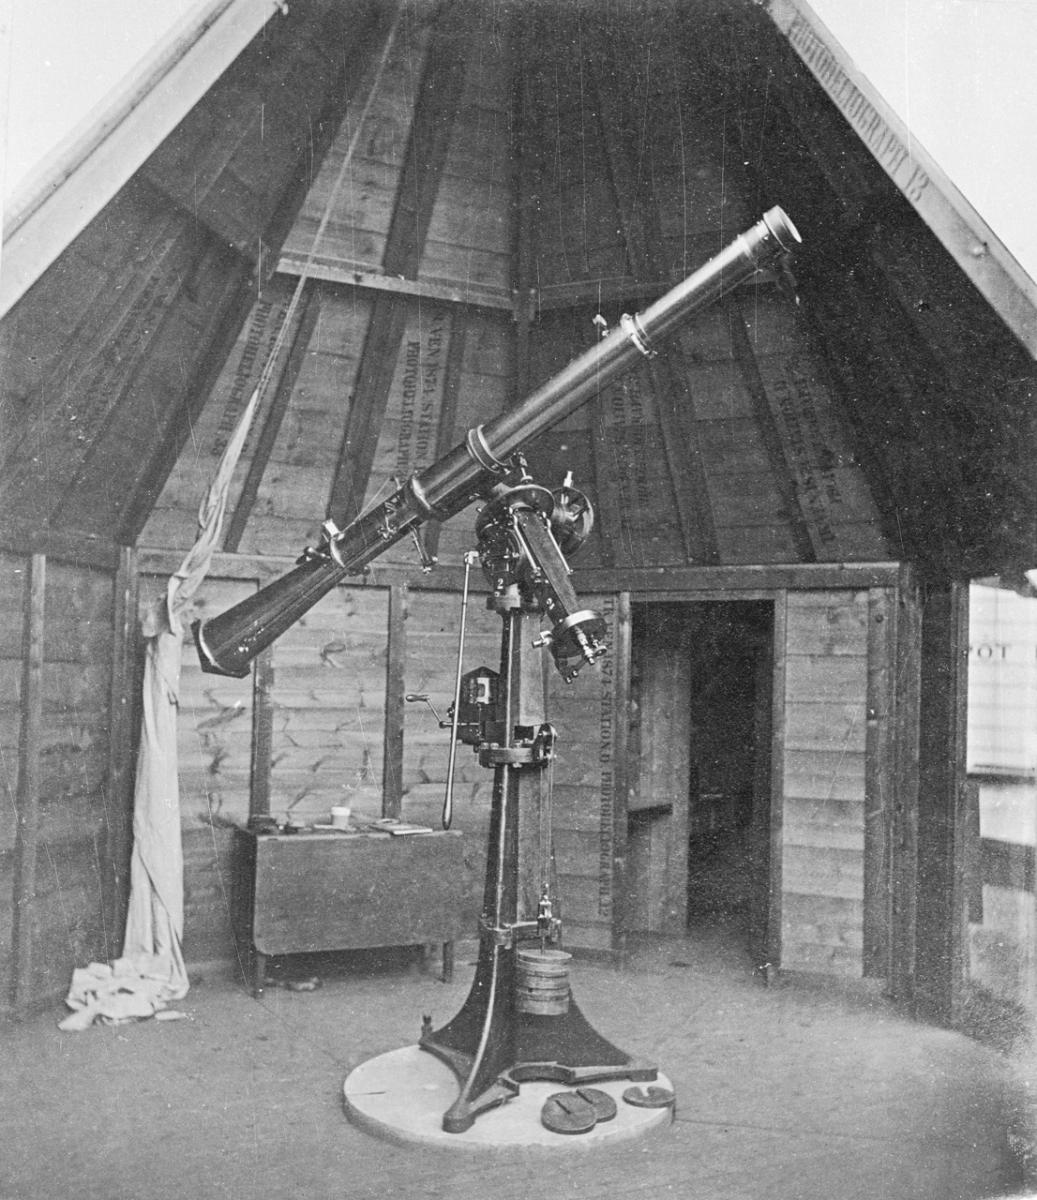 Image of old photoheliograph in an old wooden observatory building